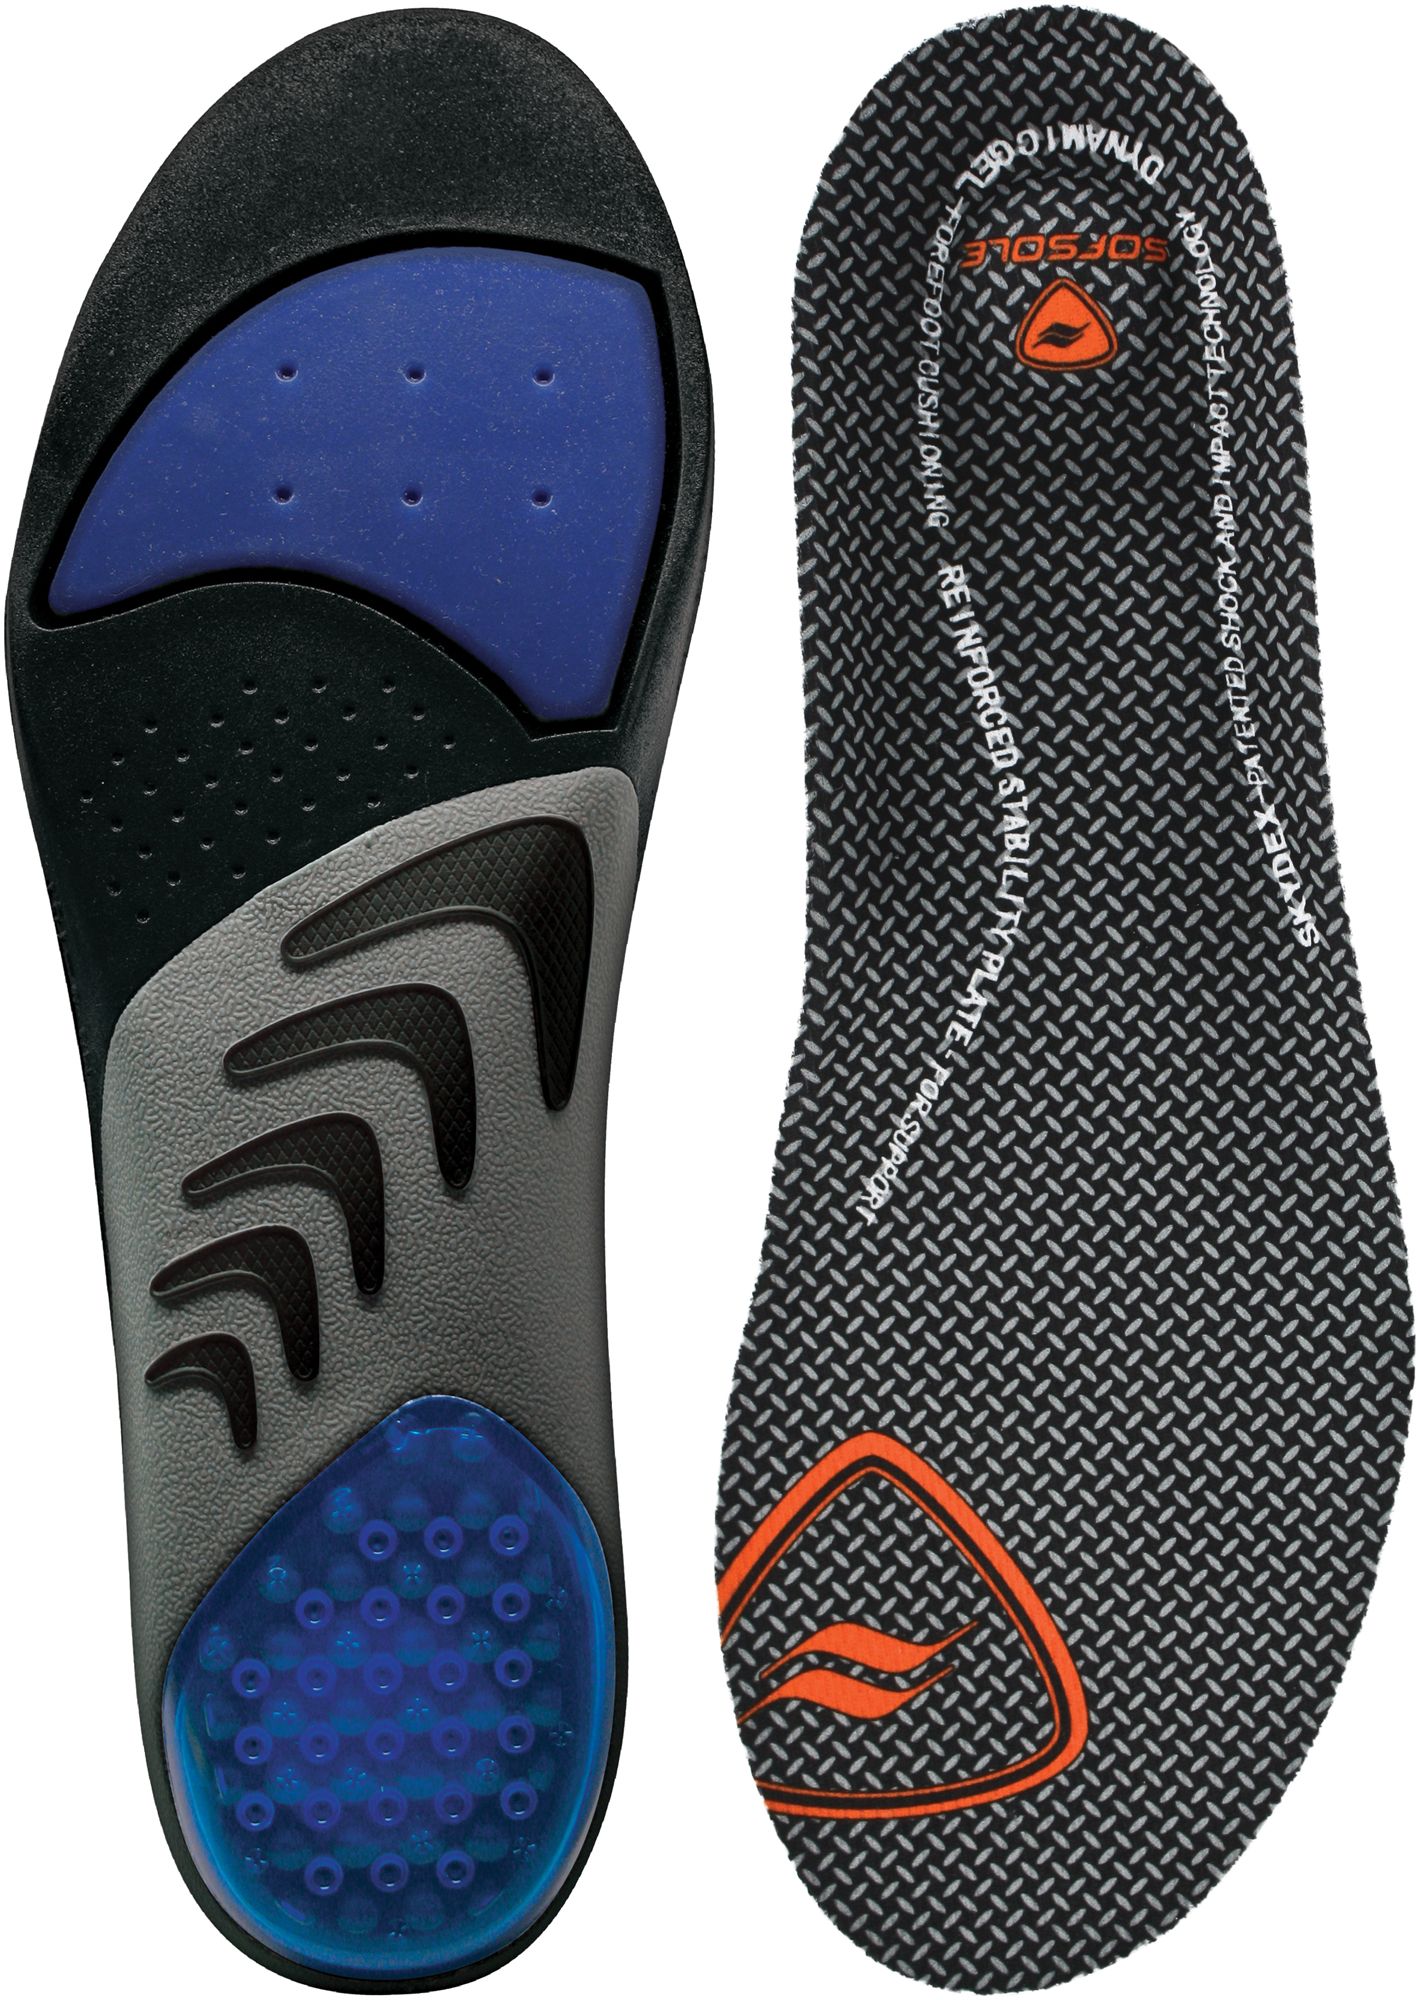 sof sole airr orthotic insoles